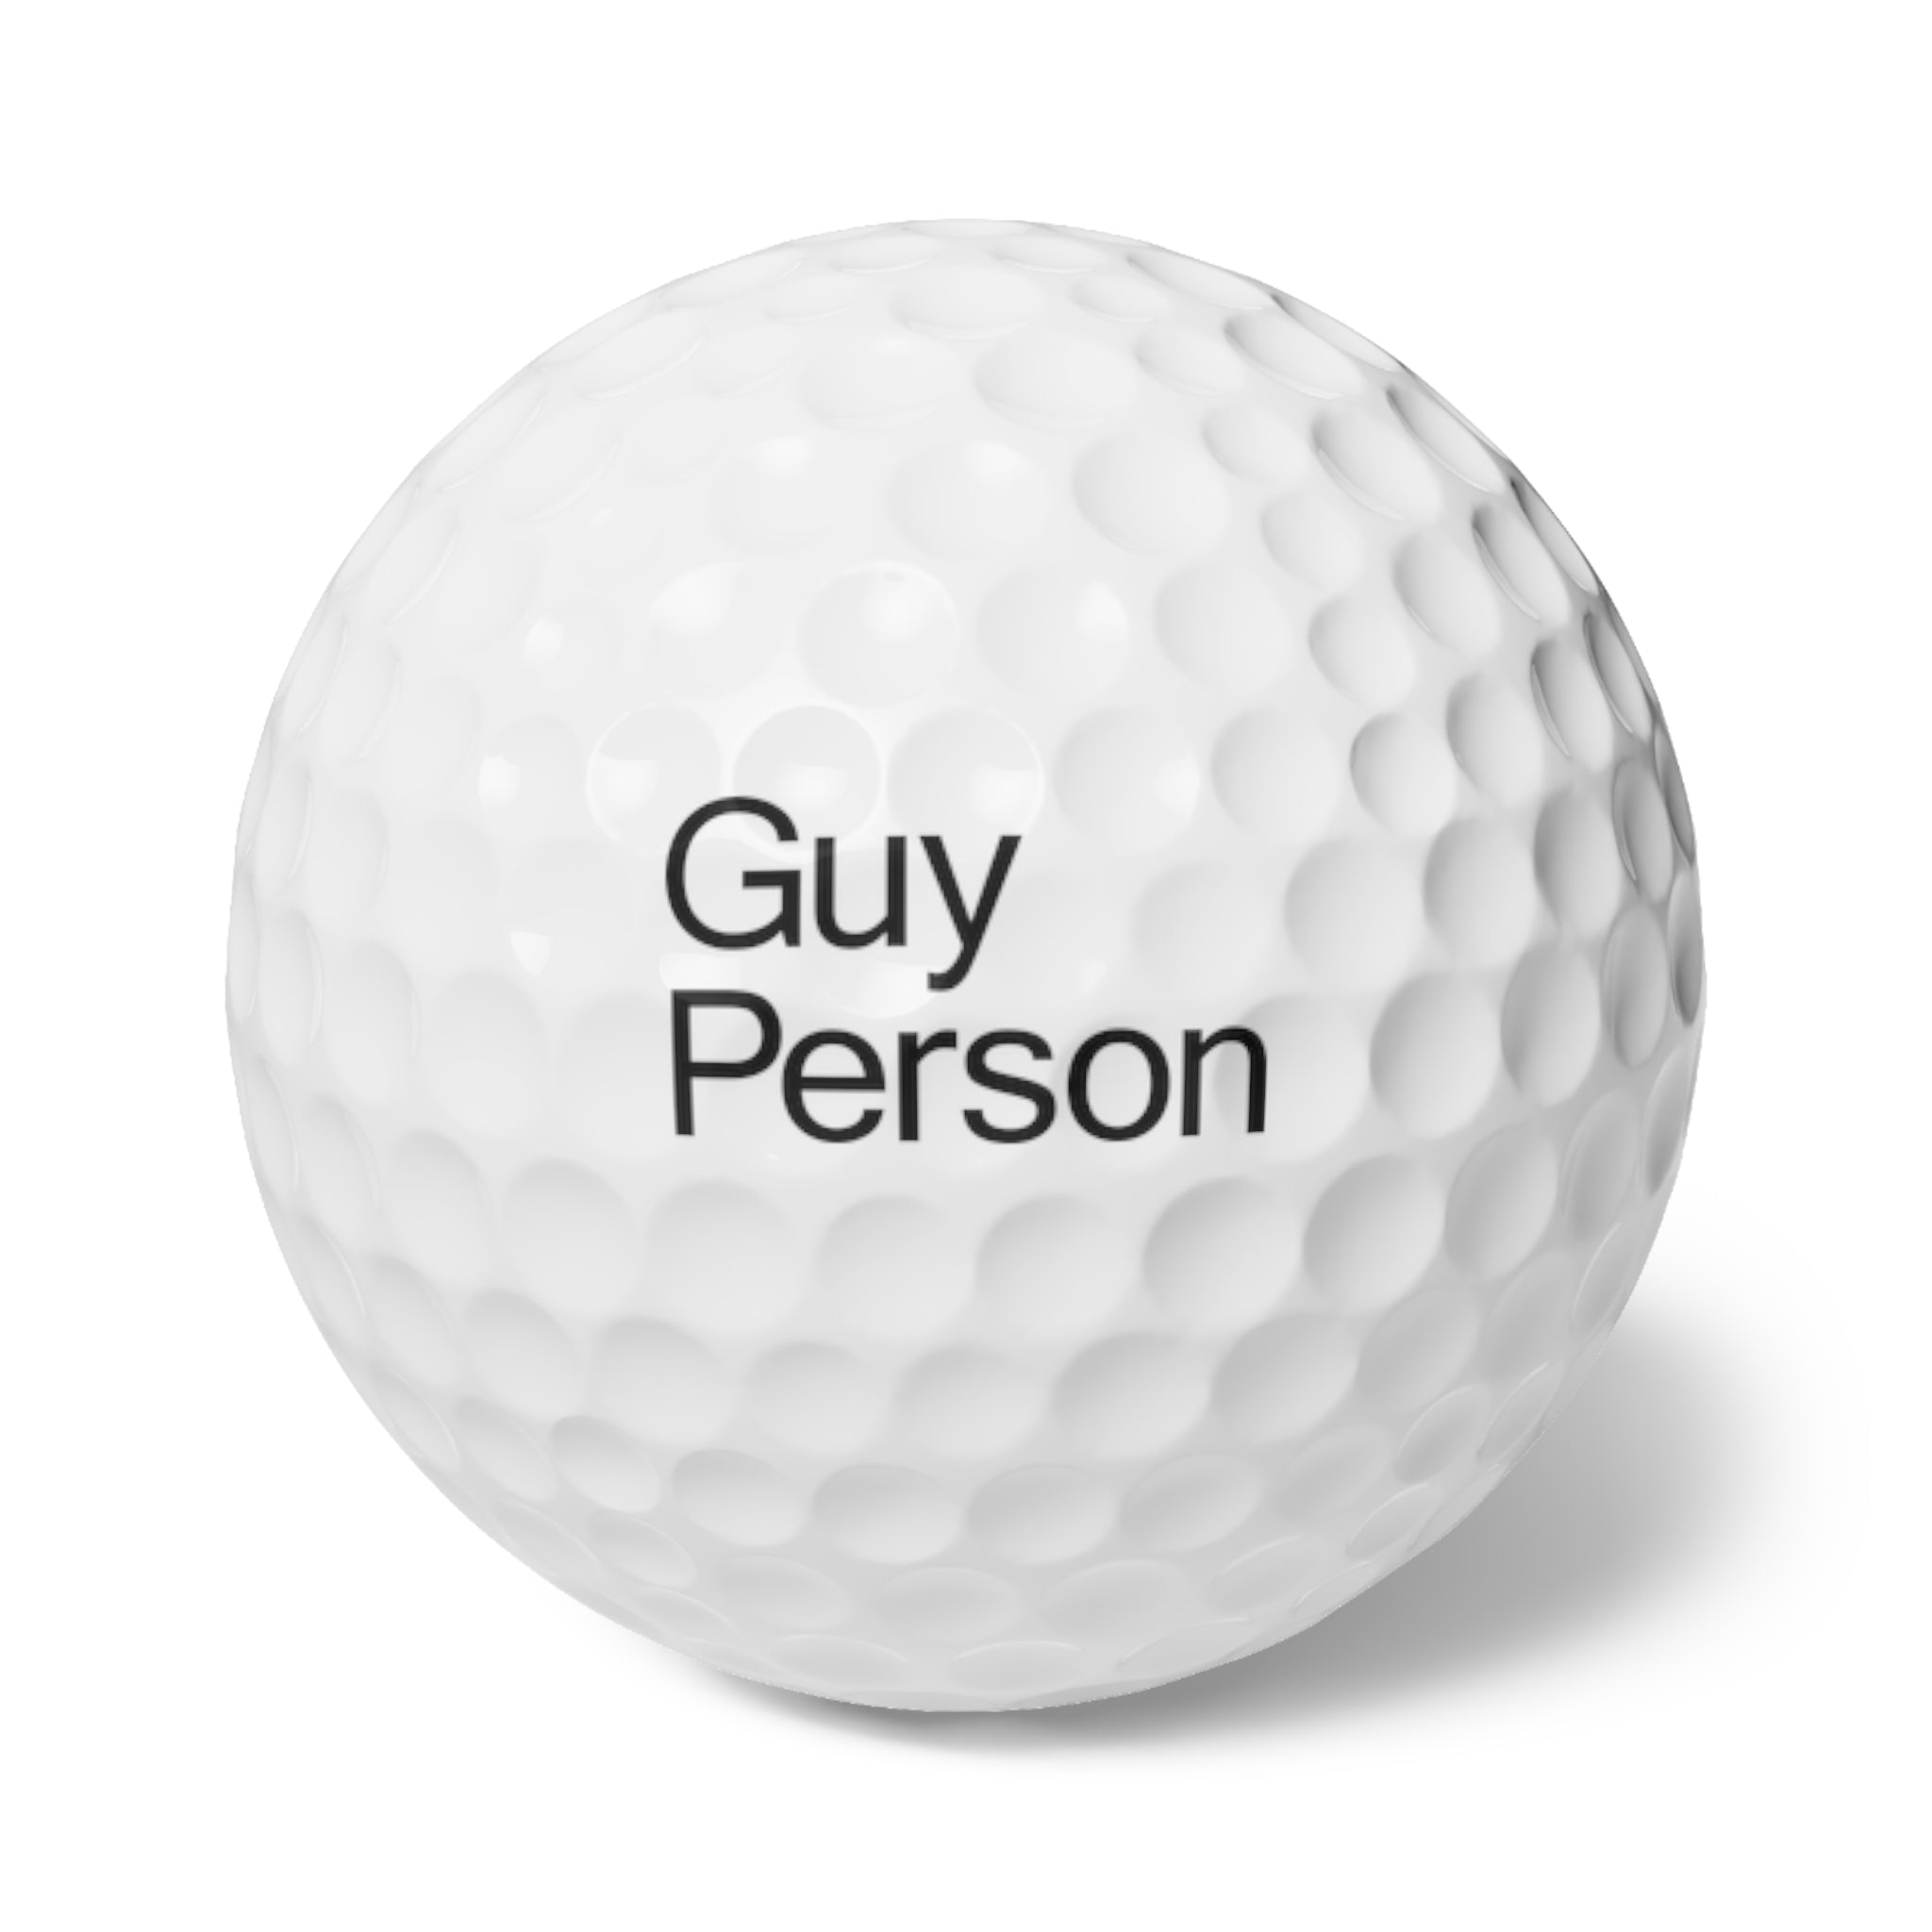 Guy Person Golfball (6-Pack)